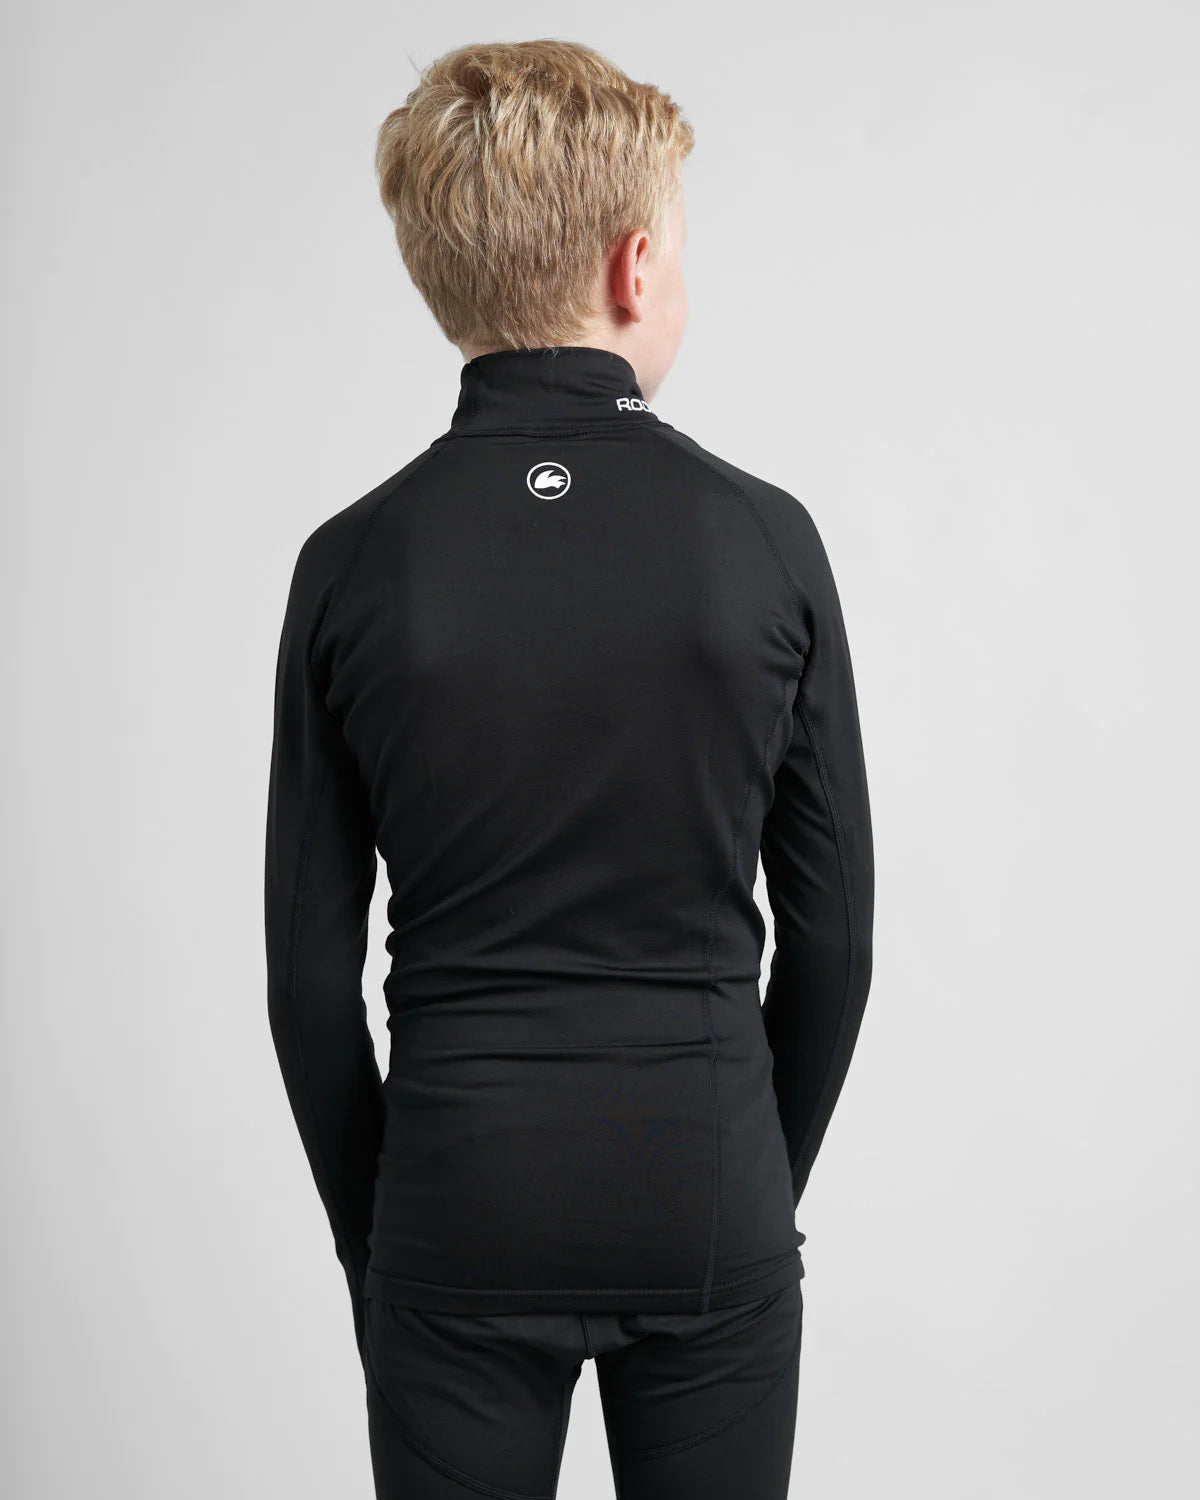 Rooster Polypro Junior Top - Black